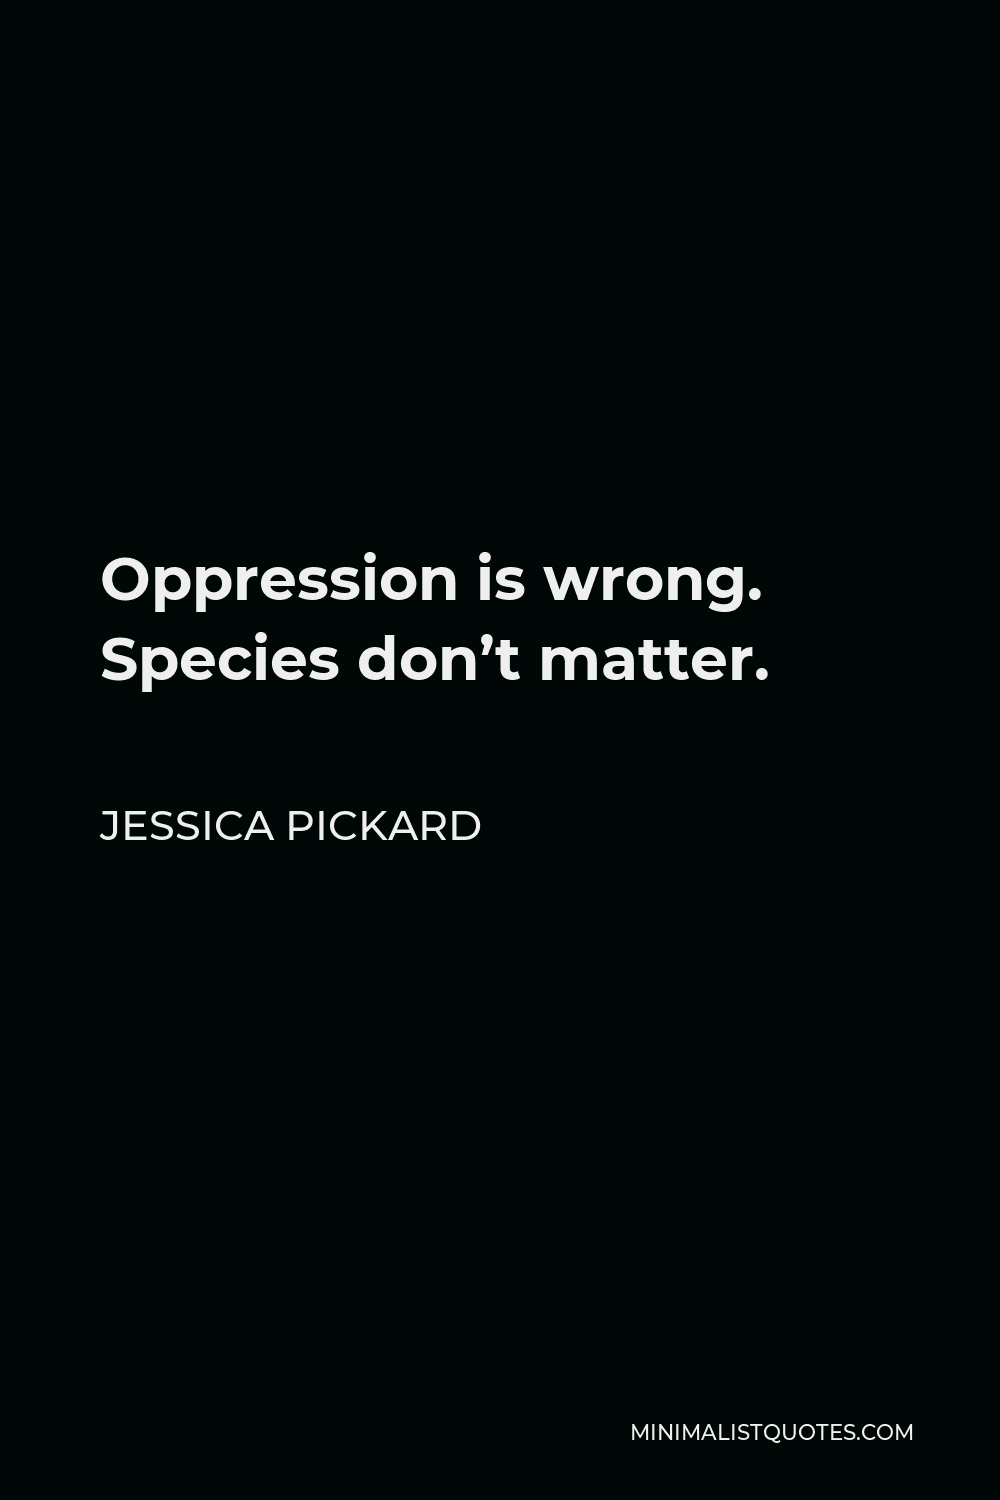 Jessica Pickard Quote - Oppression is wrong. Species don’t matter.